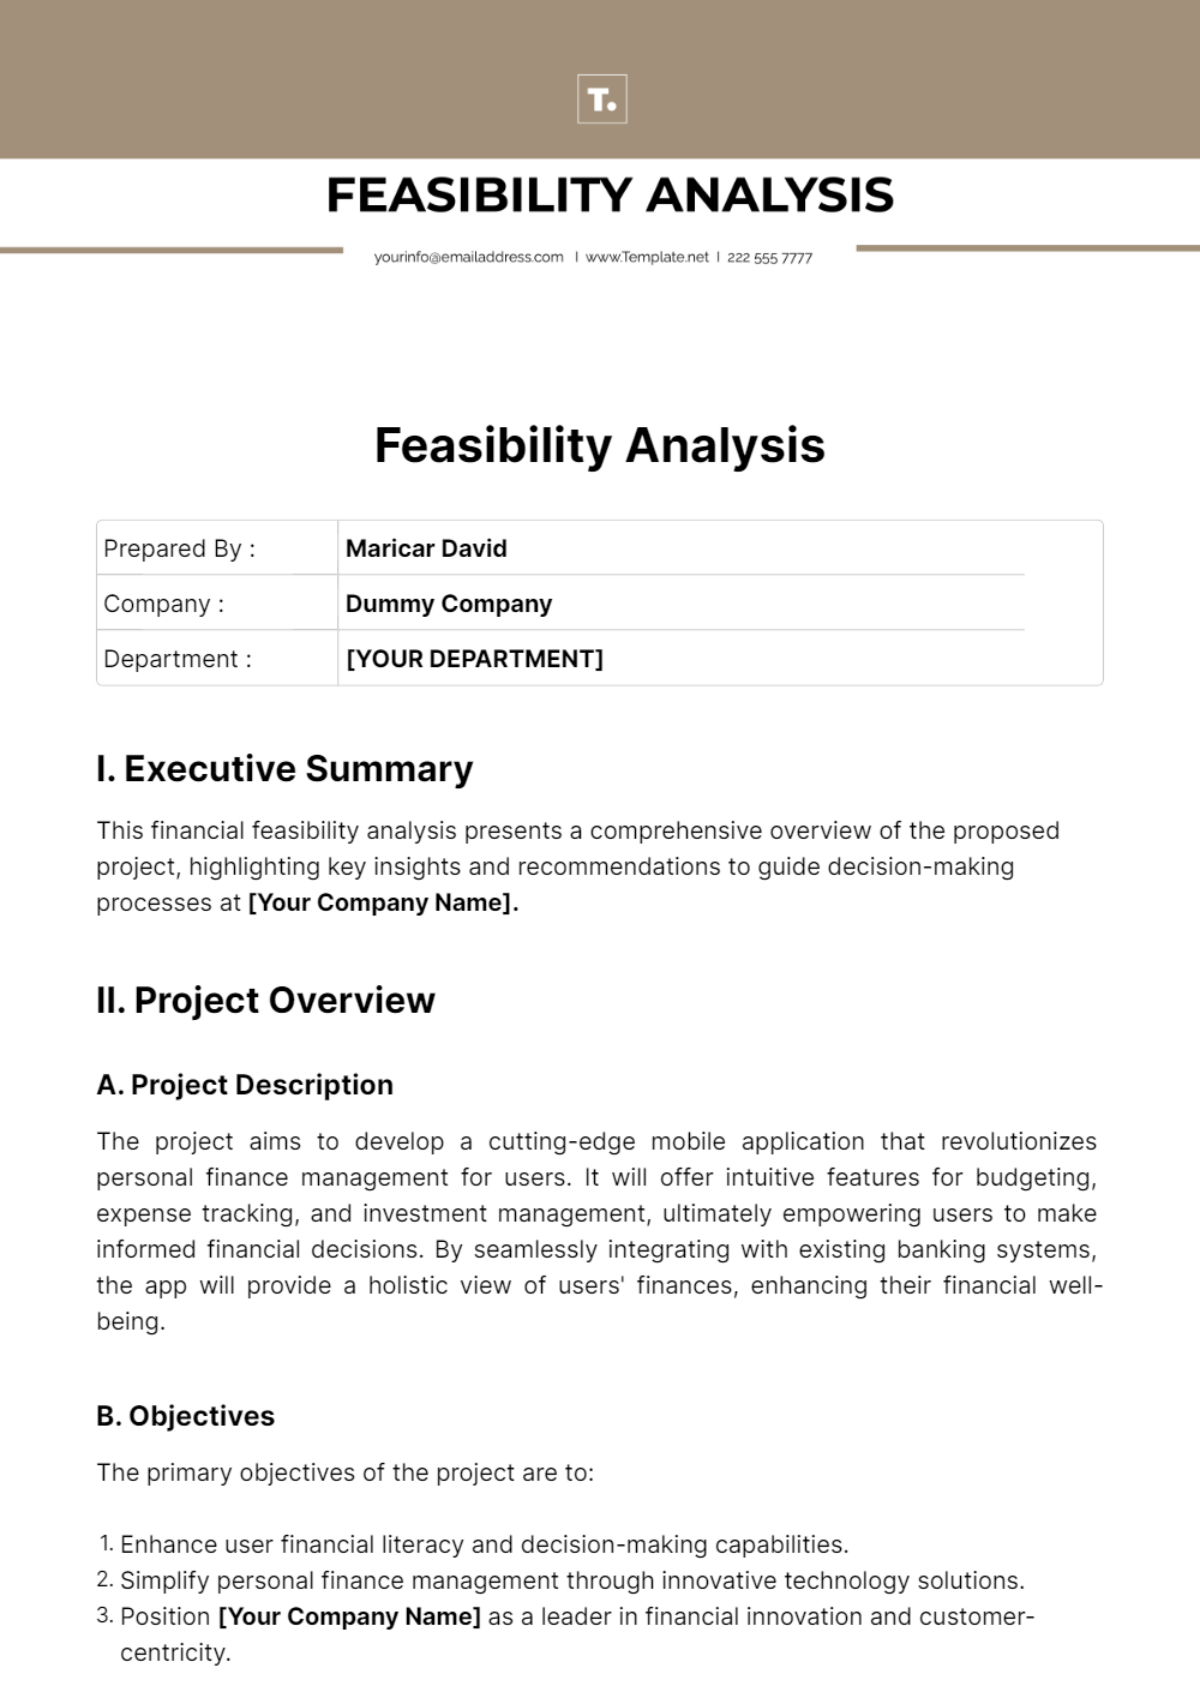 Feasibility Analysis Template